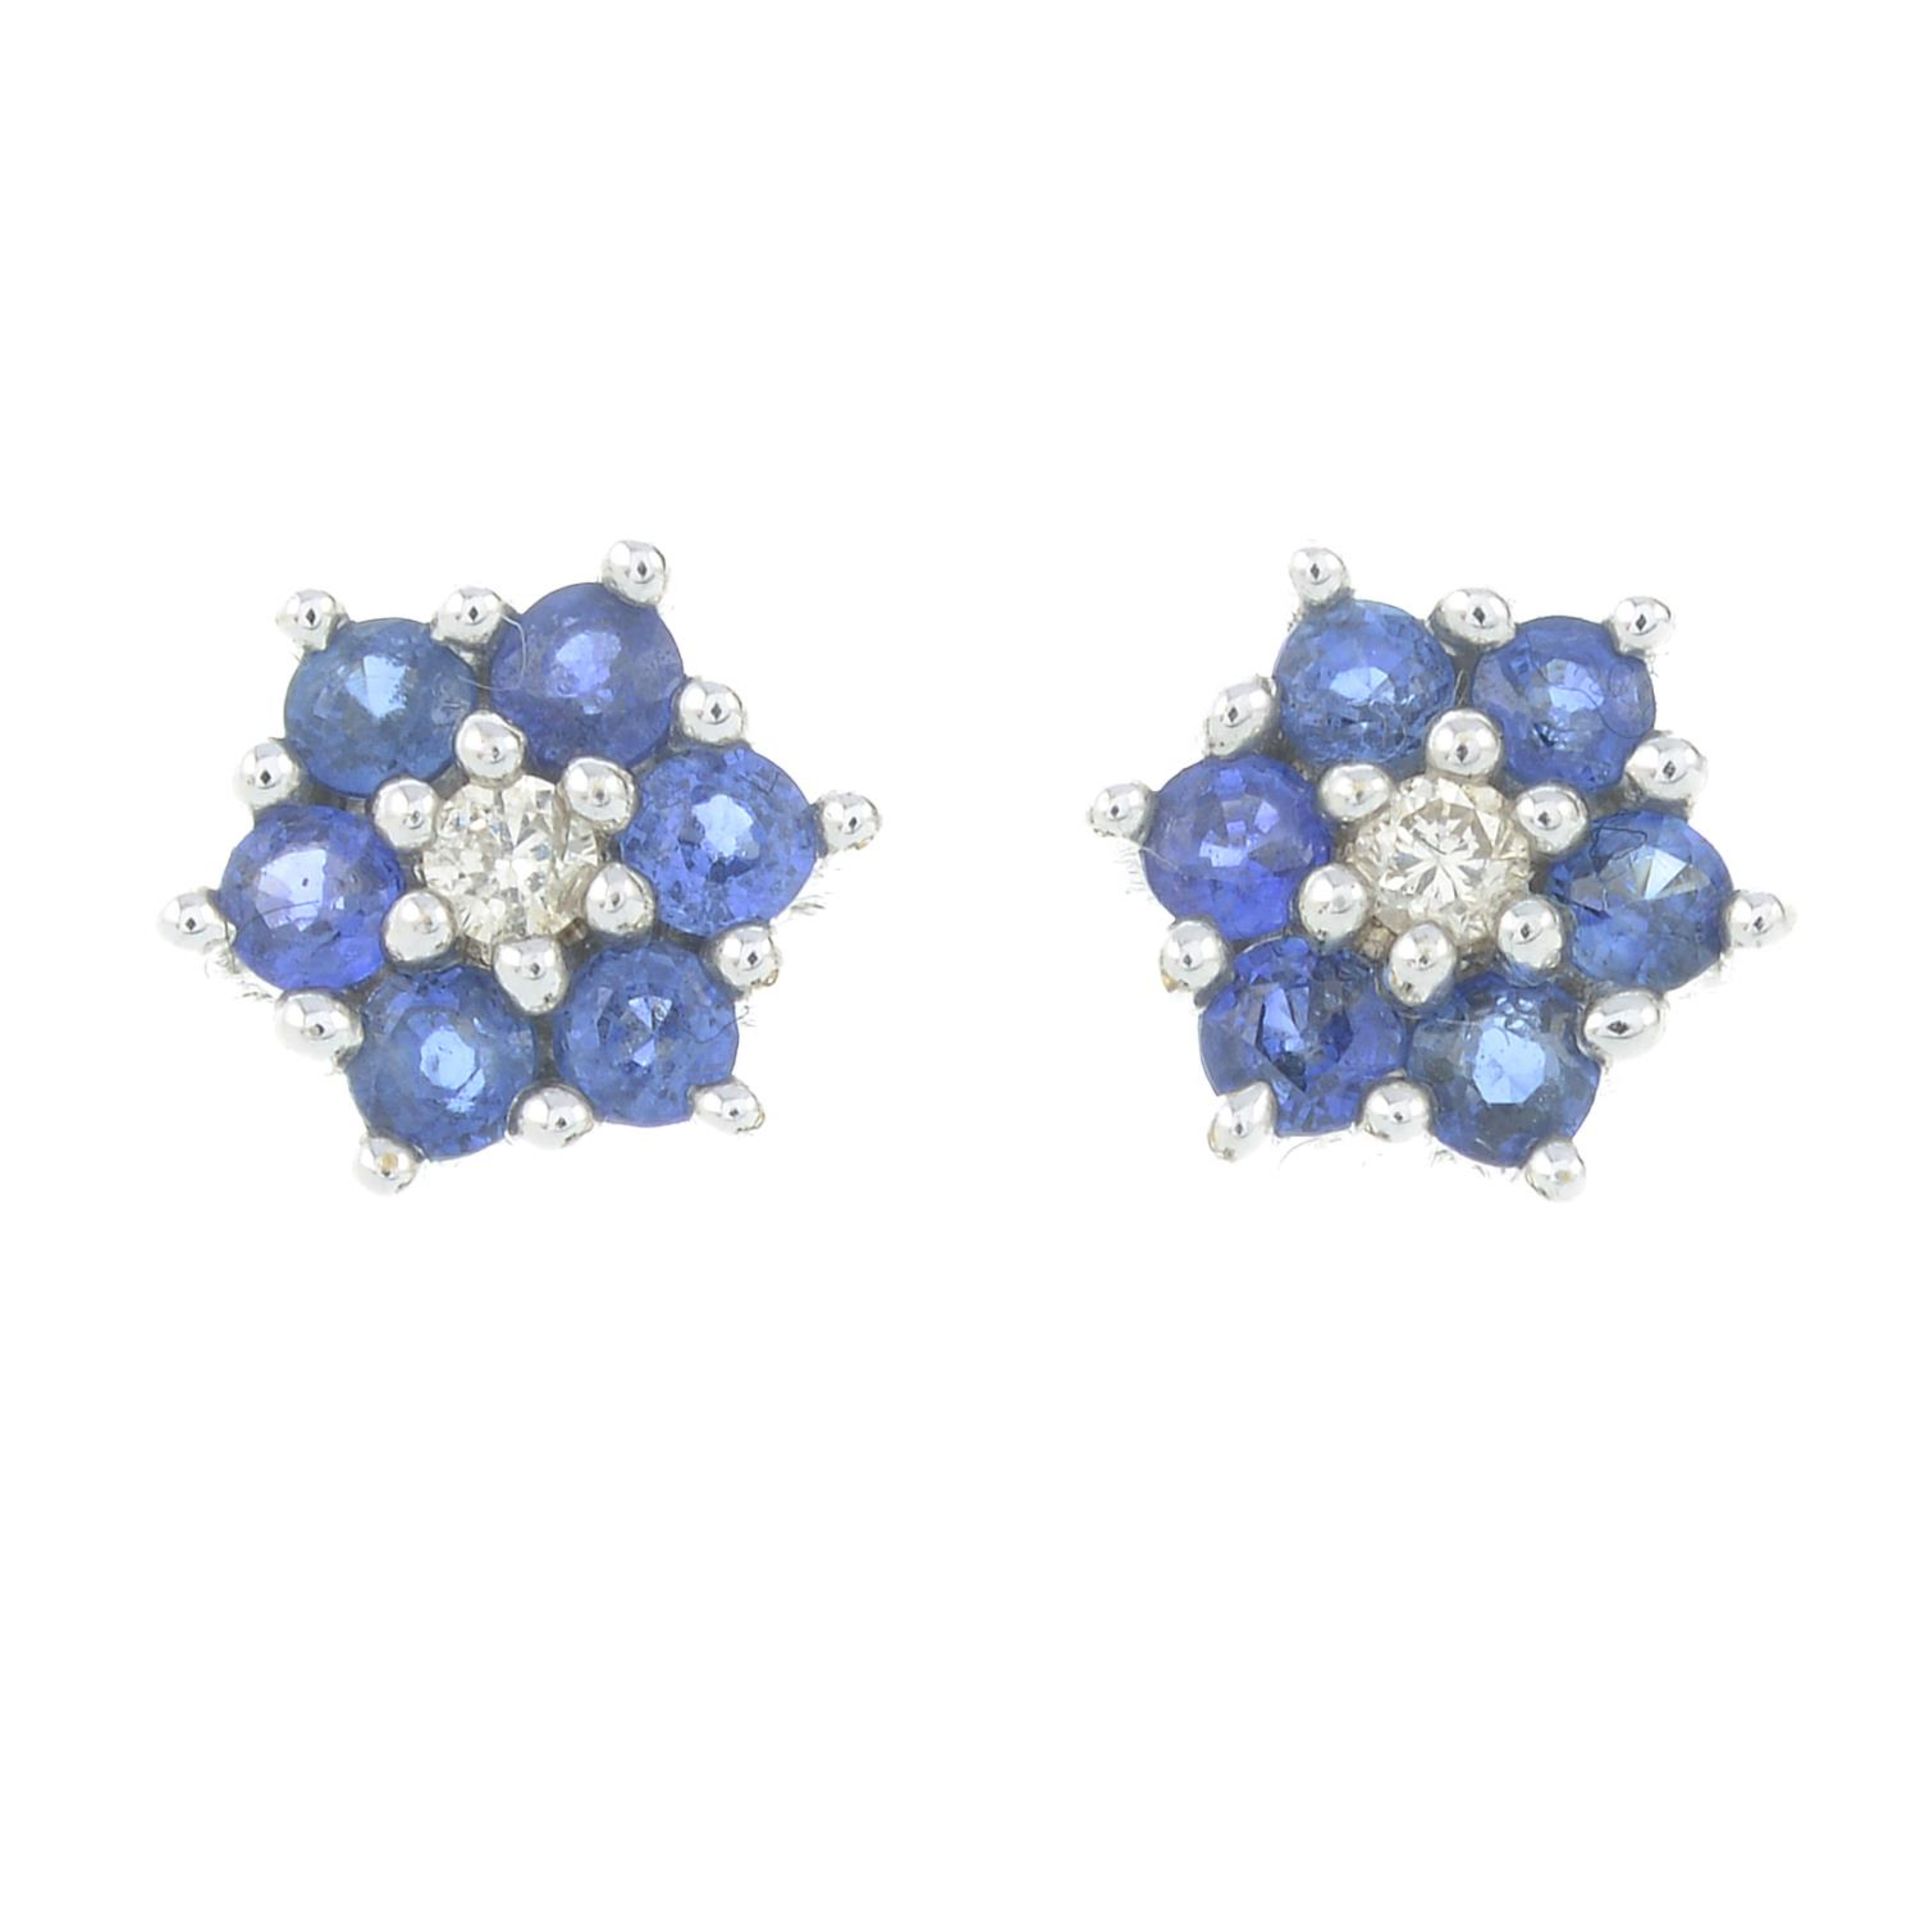 Sapphire and diamond cluster earrings, stamped 9K, length 0.9cm, 2.4gms.